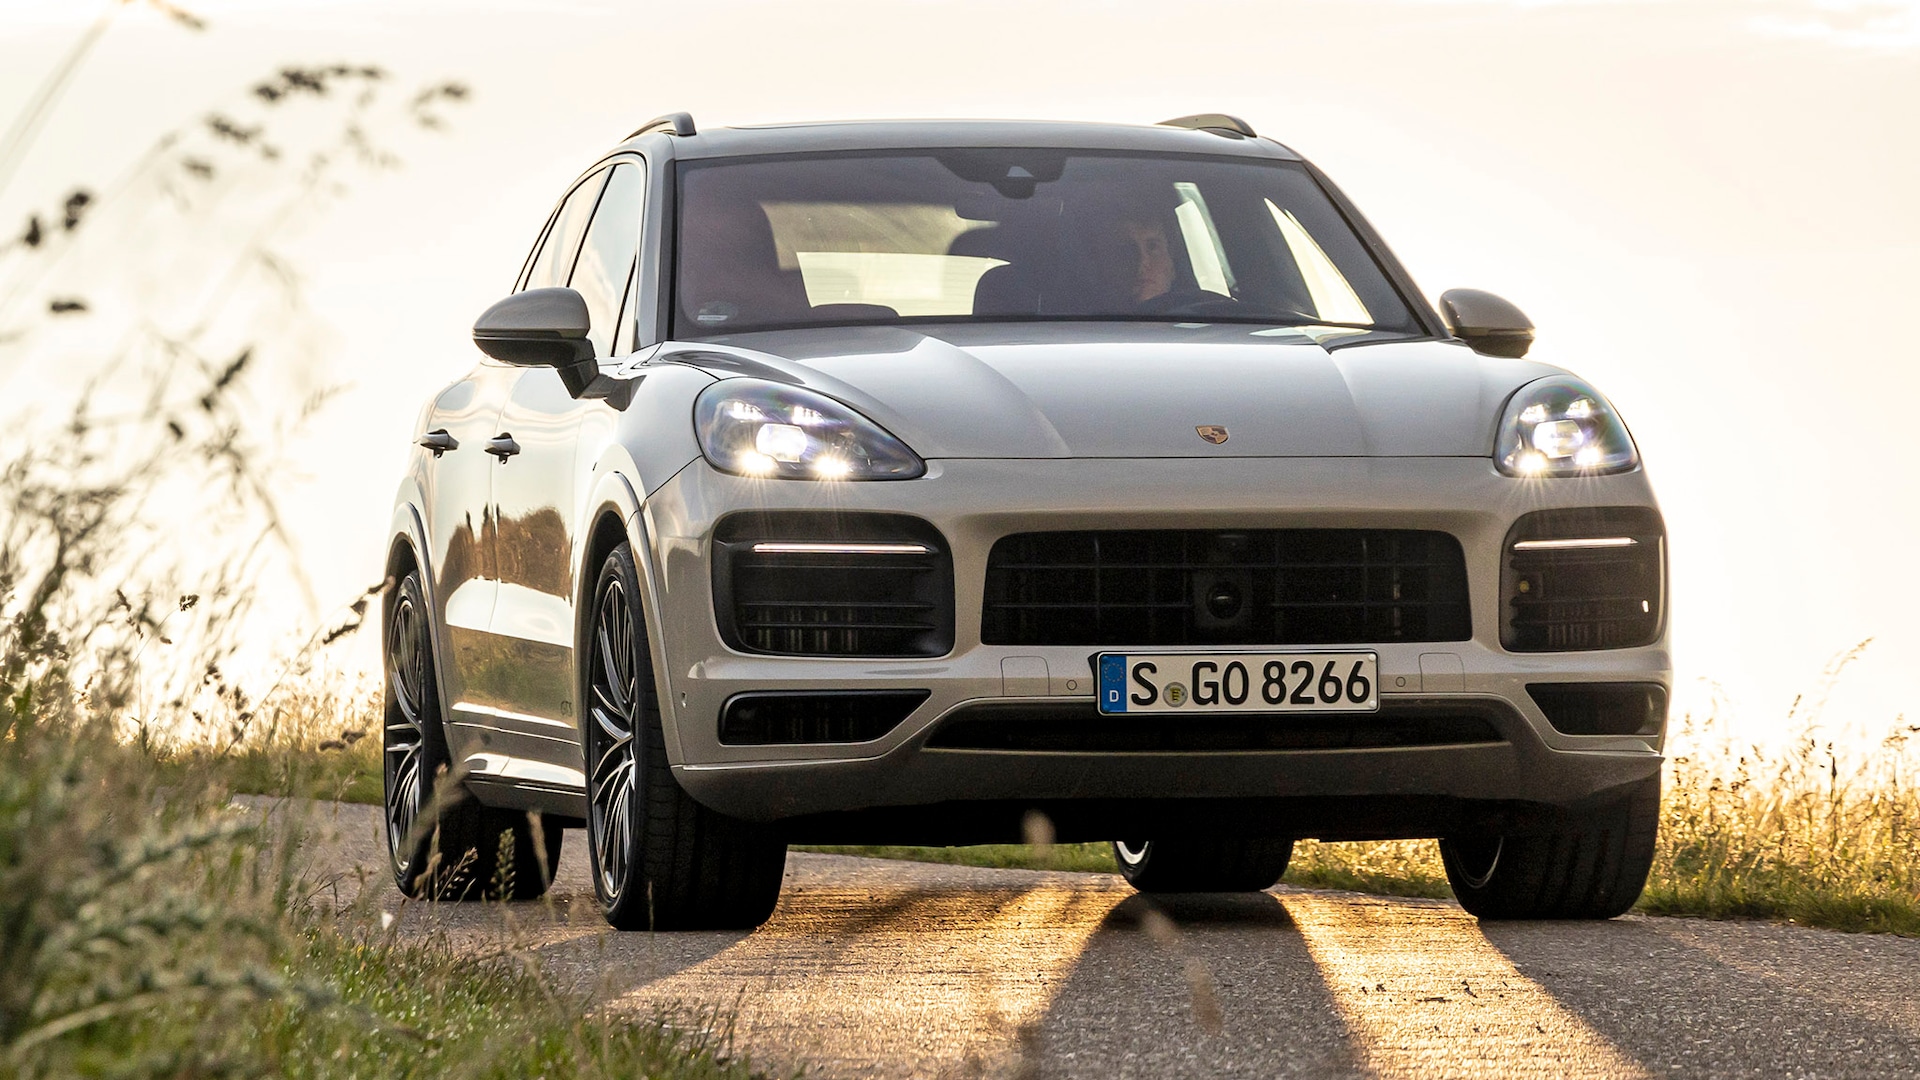 2022 Porsche Cayenne Prices, Reviews, and Photos - MotorTrend